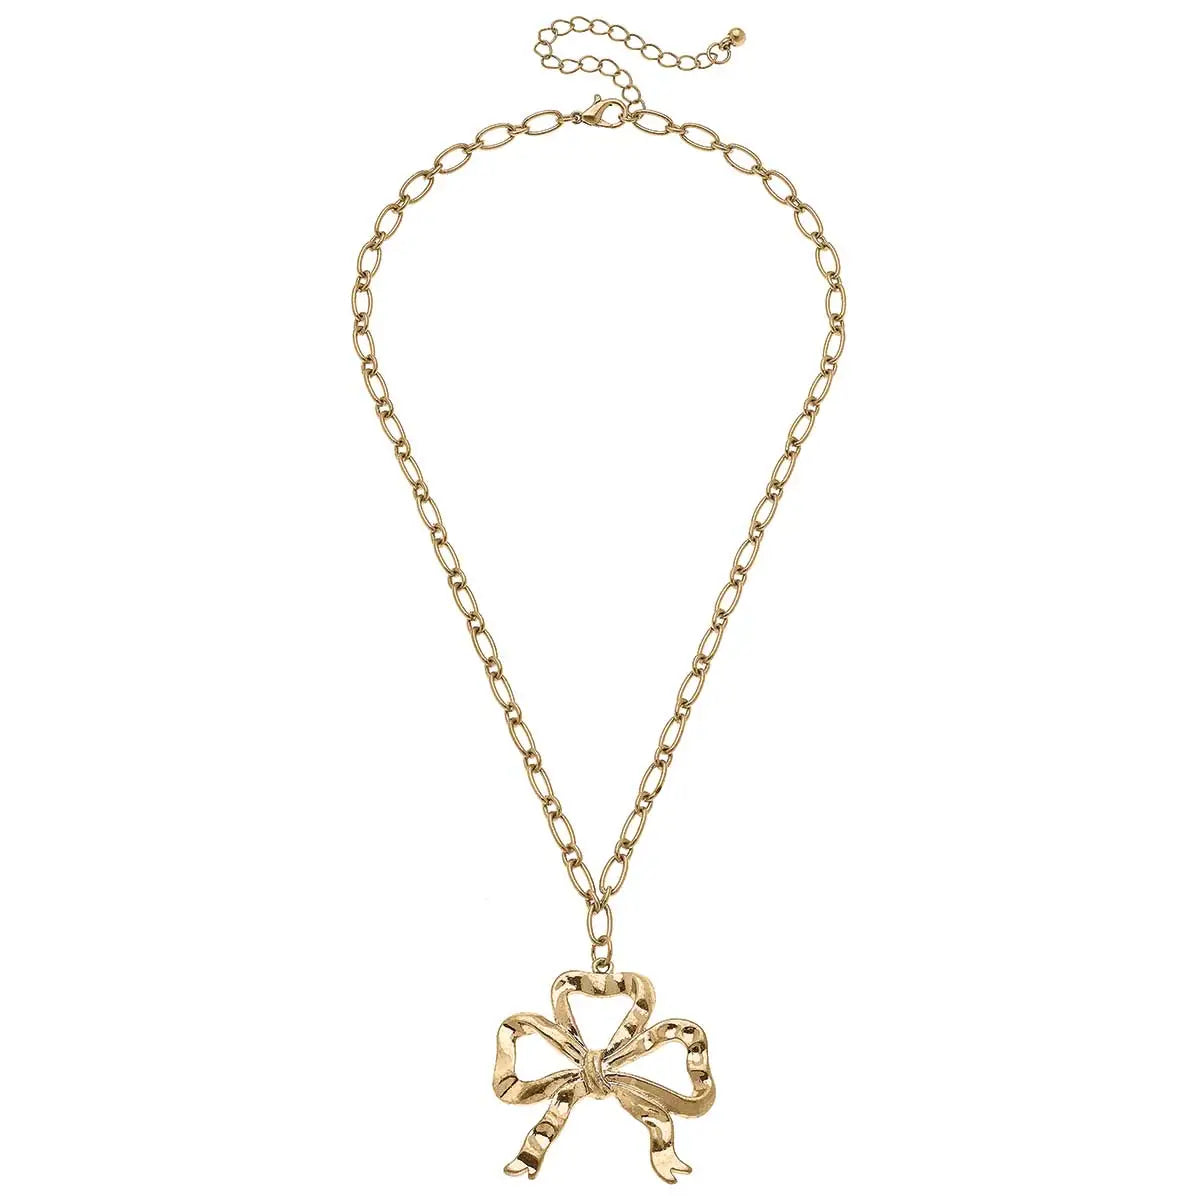 Greyson Bow Necklace in Worn Gold